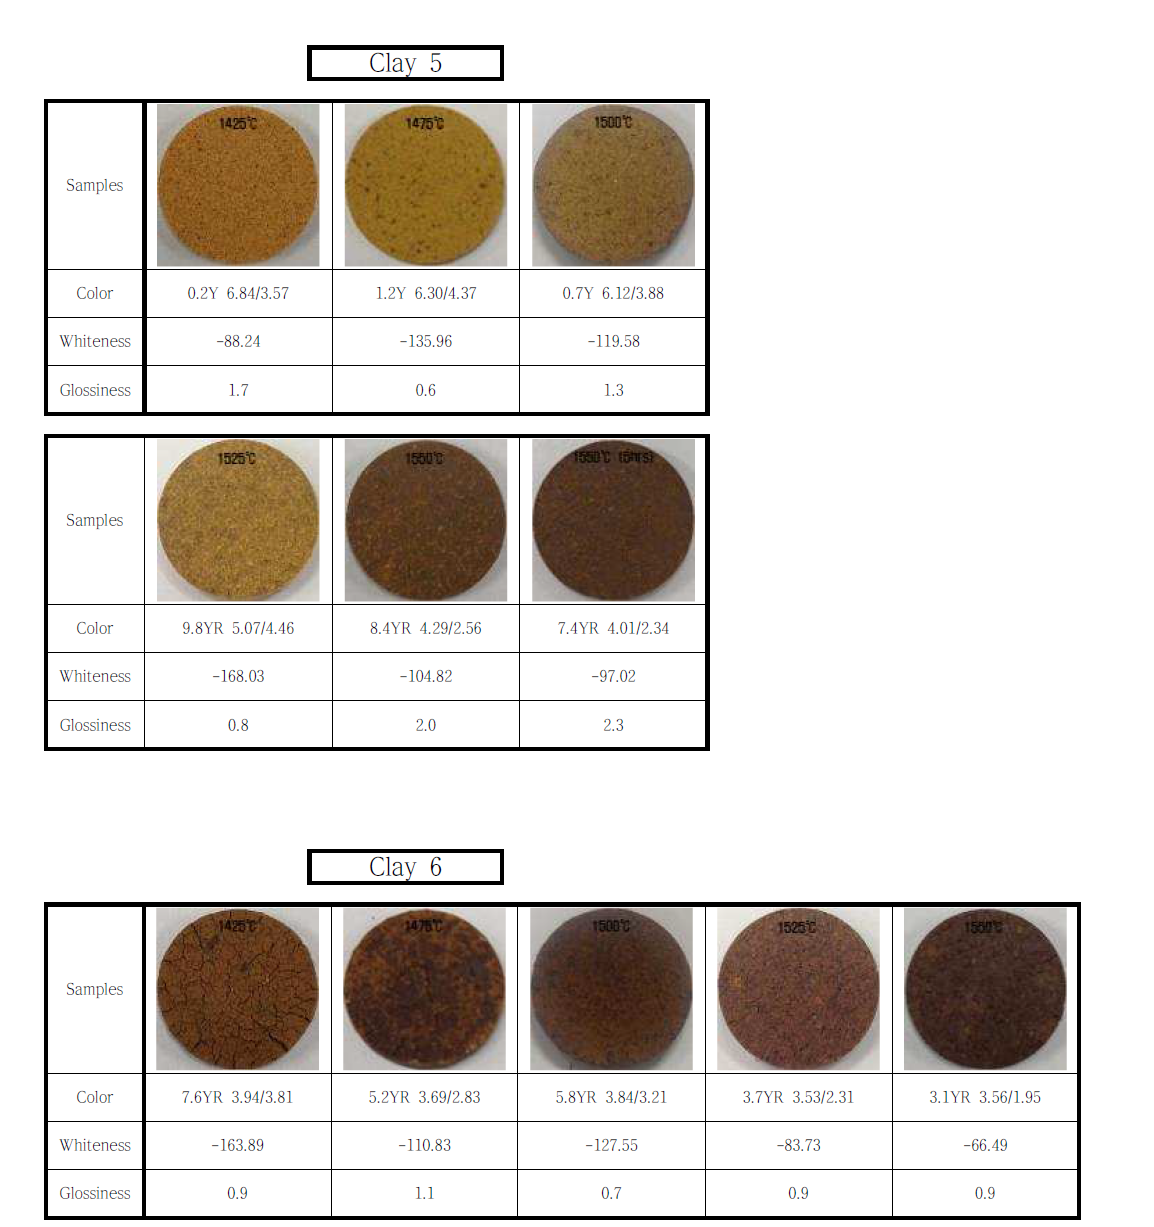 Samples of Tanzanian clay after heat treatment at different temperatures in air